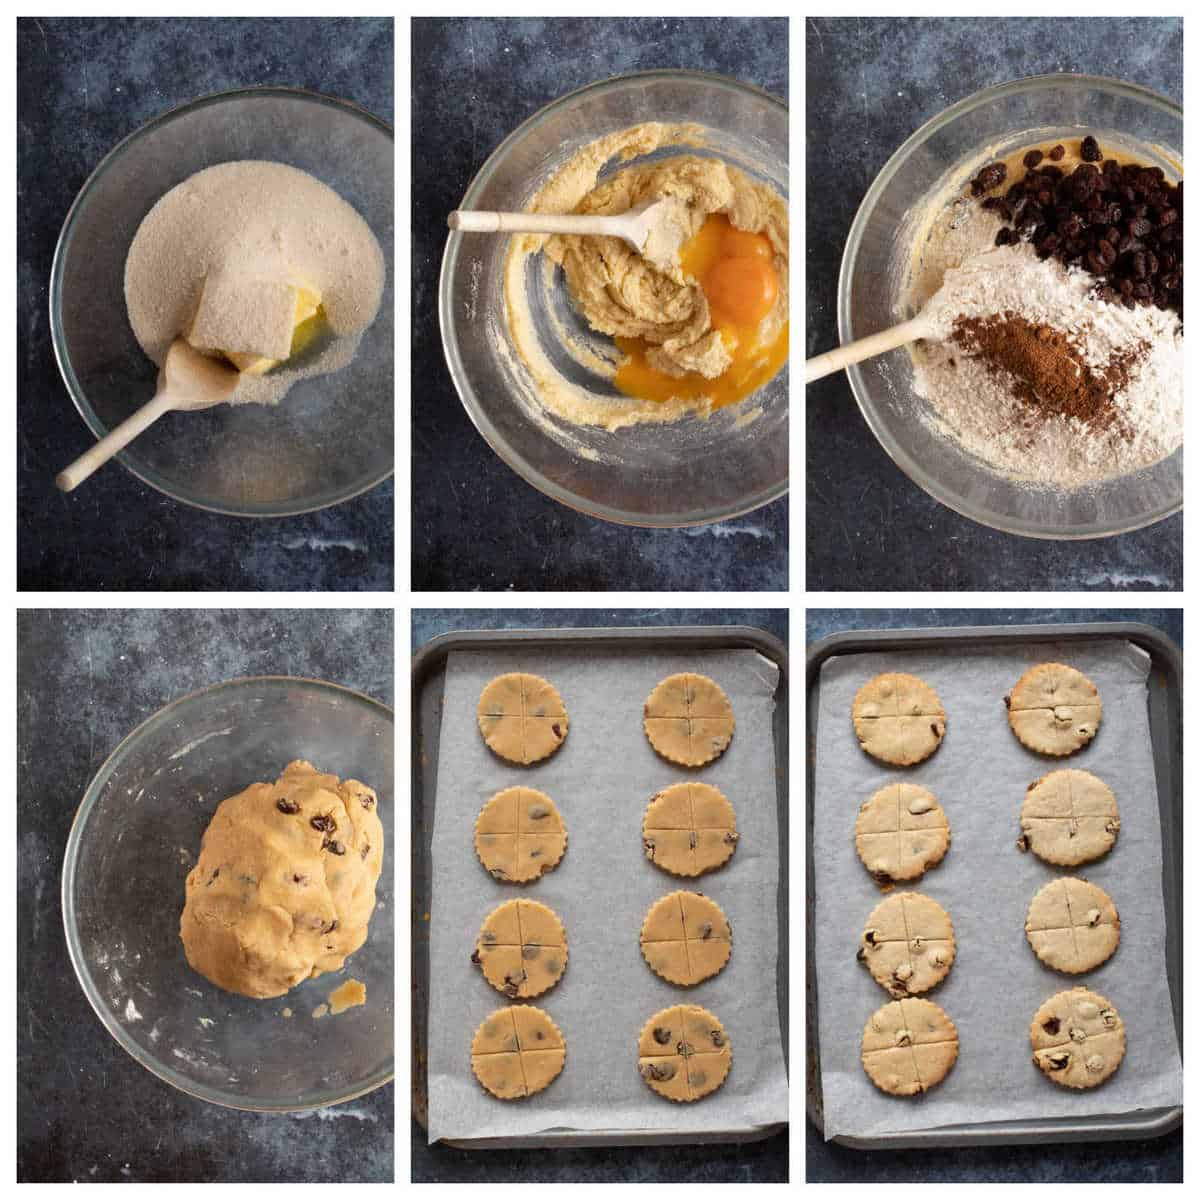 Step by step photo instructions for making traditional soul cakes.